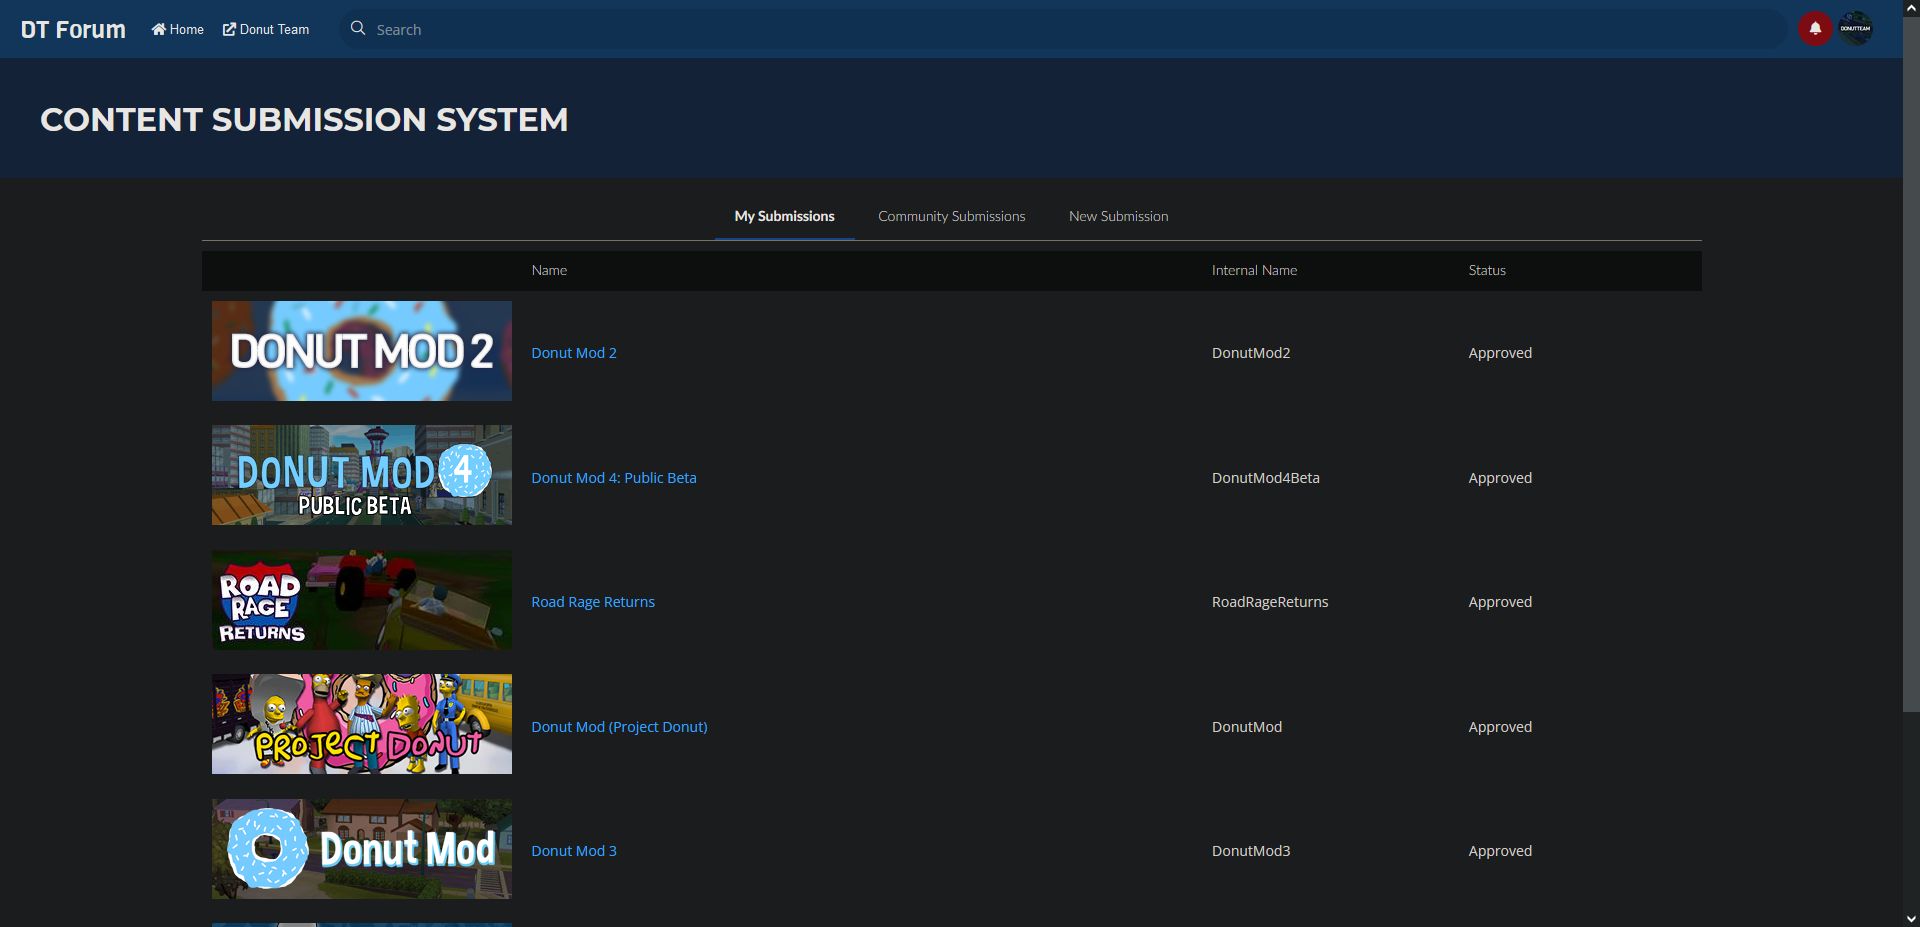 The slightly improved design of the Content Submission System page.